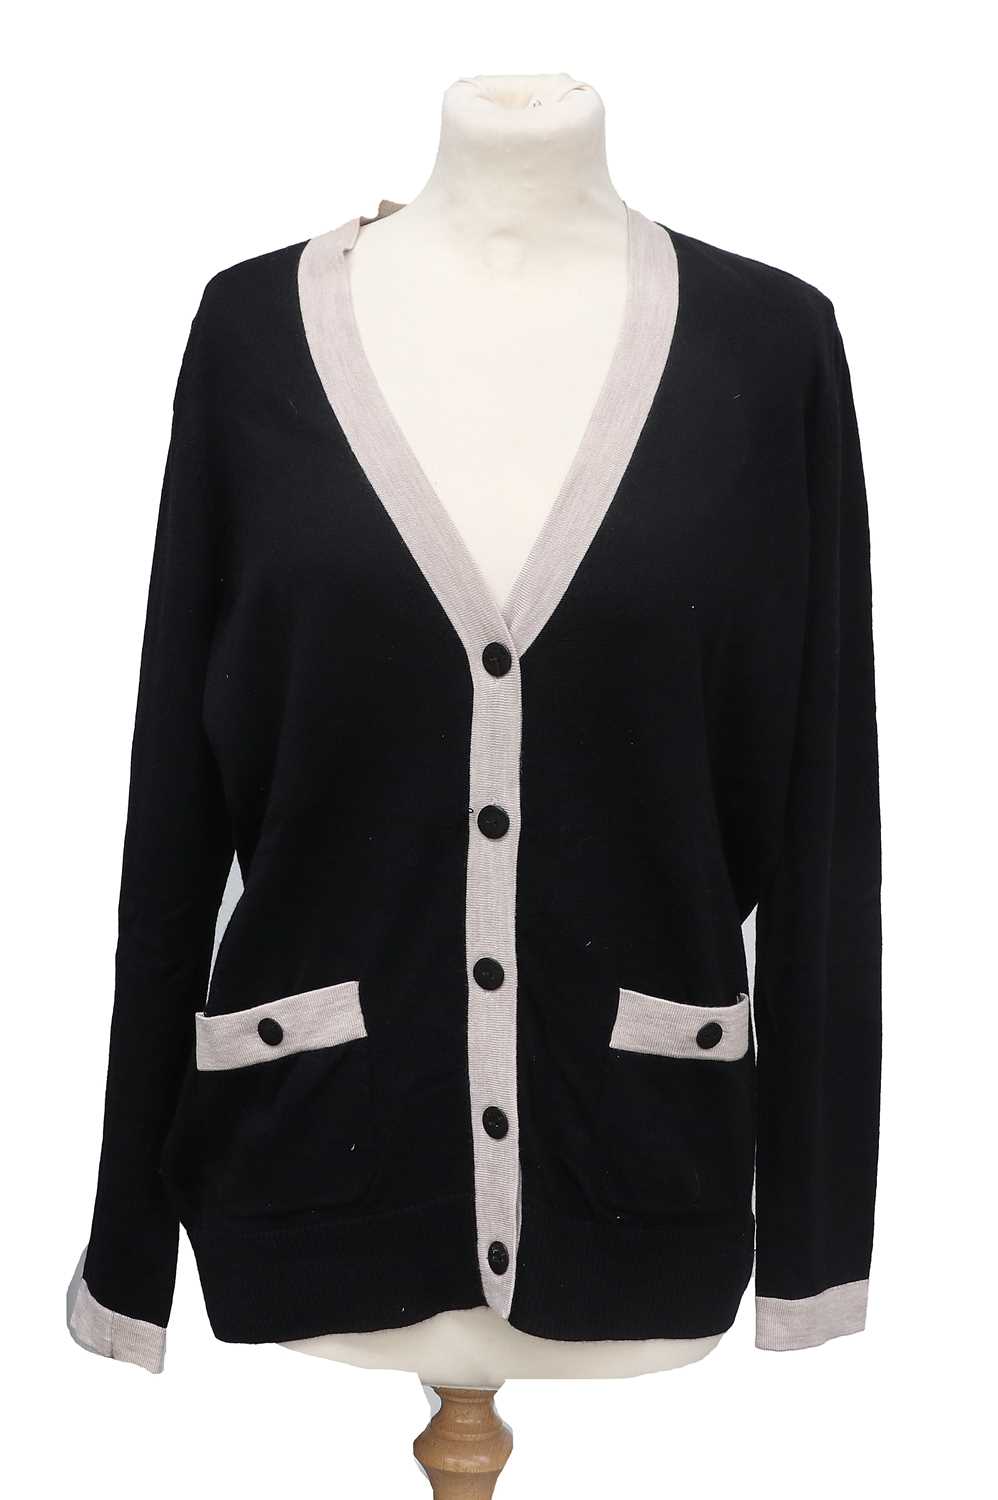 Chanel Uniform, comprising a black wool short sleeve top with round neck, and a black long sleeve - Bild 4 aus 5